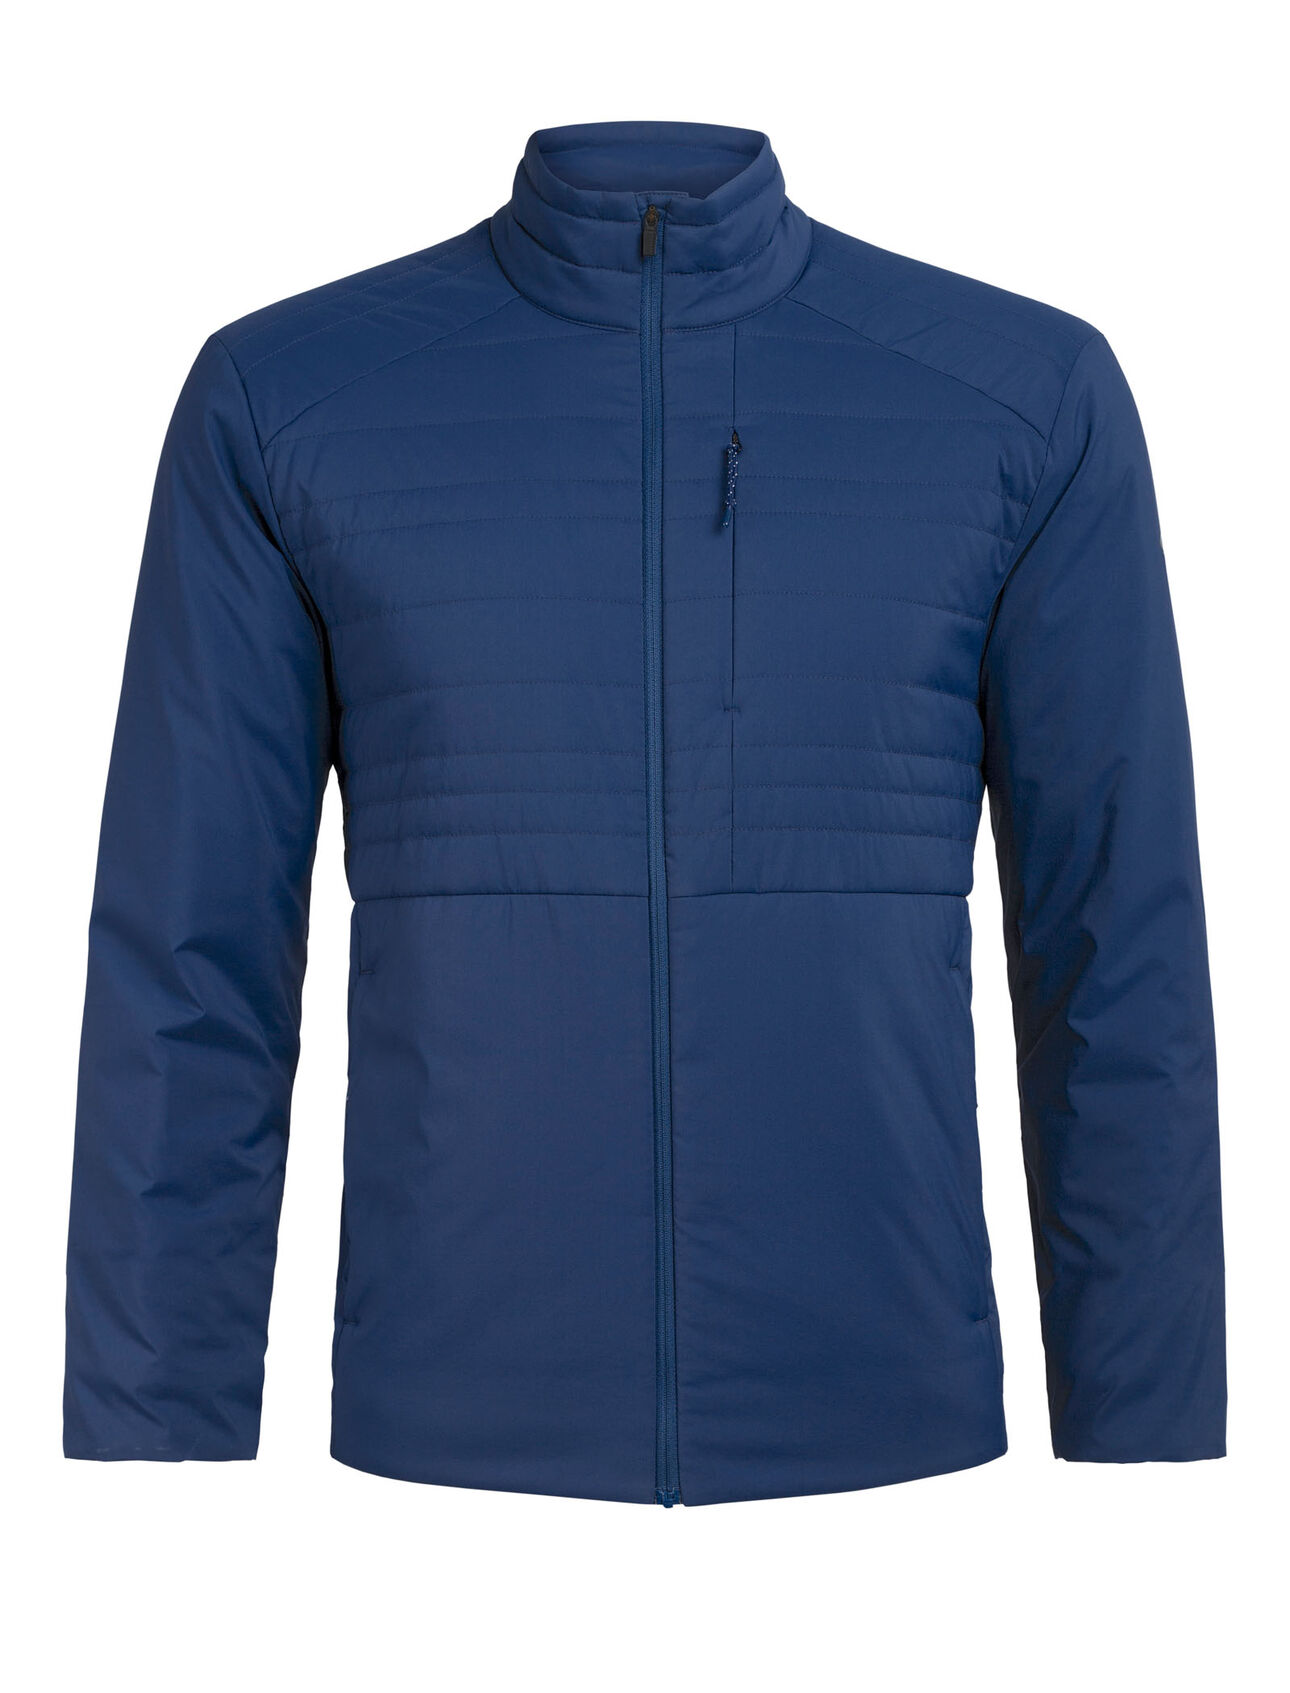 Mens MerinoLoft™ Tropos Jacket A lightweight and weather-resistant men’s insulated layer made with our merinoloft™ insulation, the Tropos Jacket is high performance and made with sustainably sourced fiber.